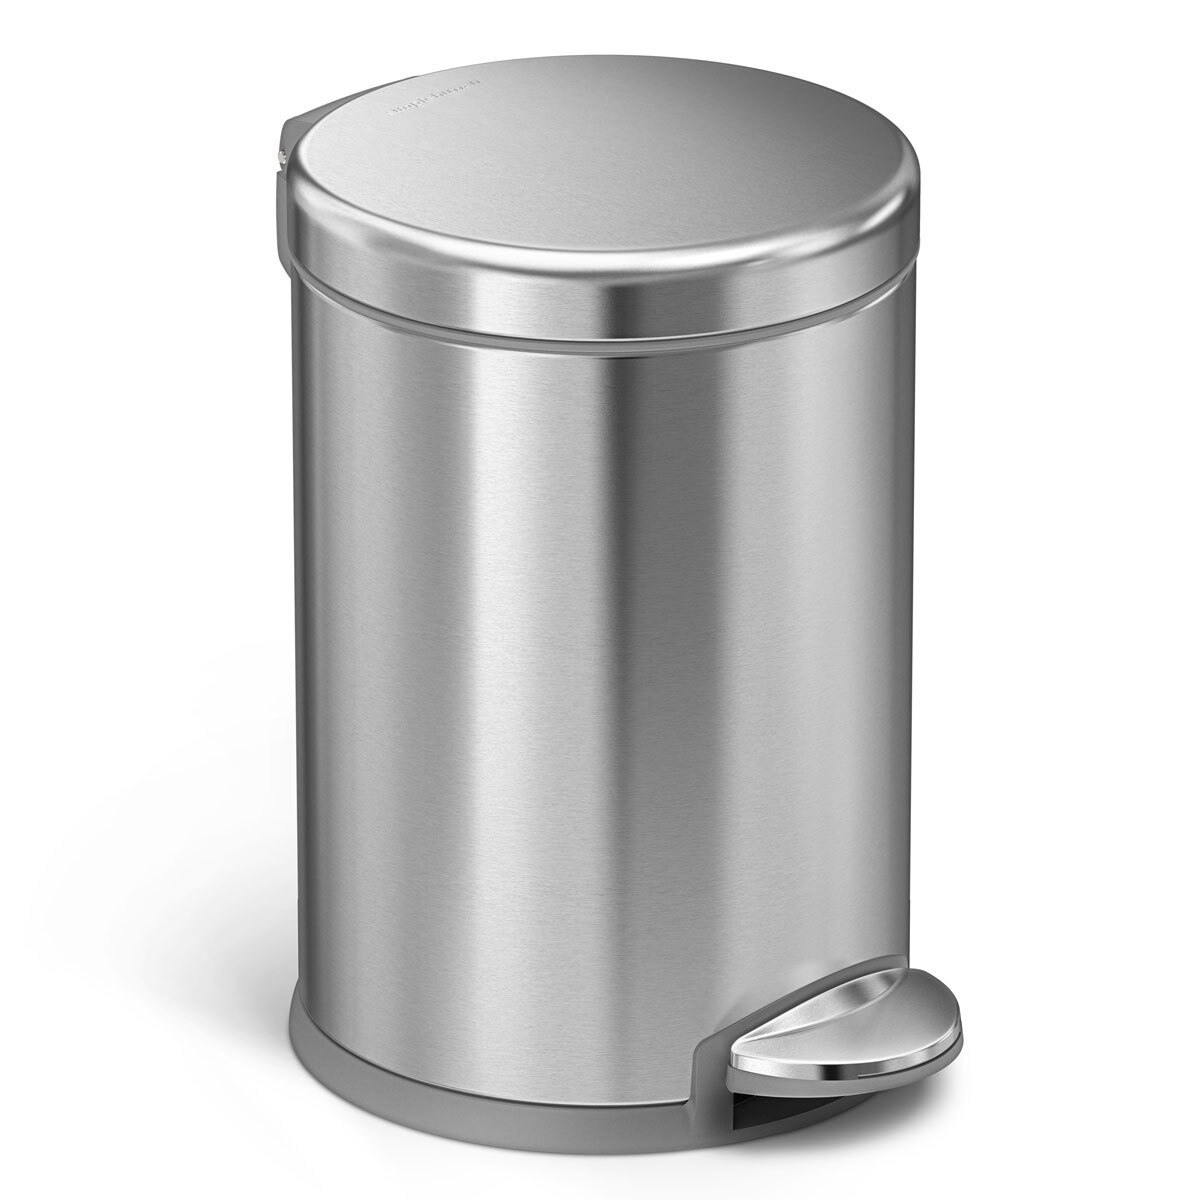 Cut out image of small bin on white background